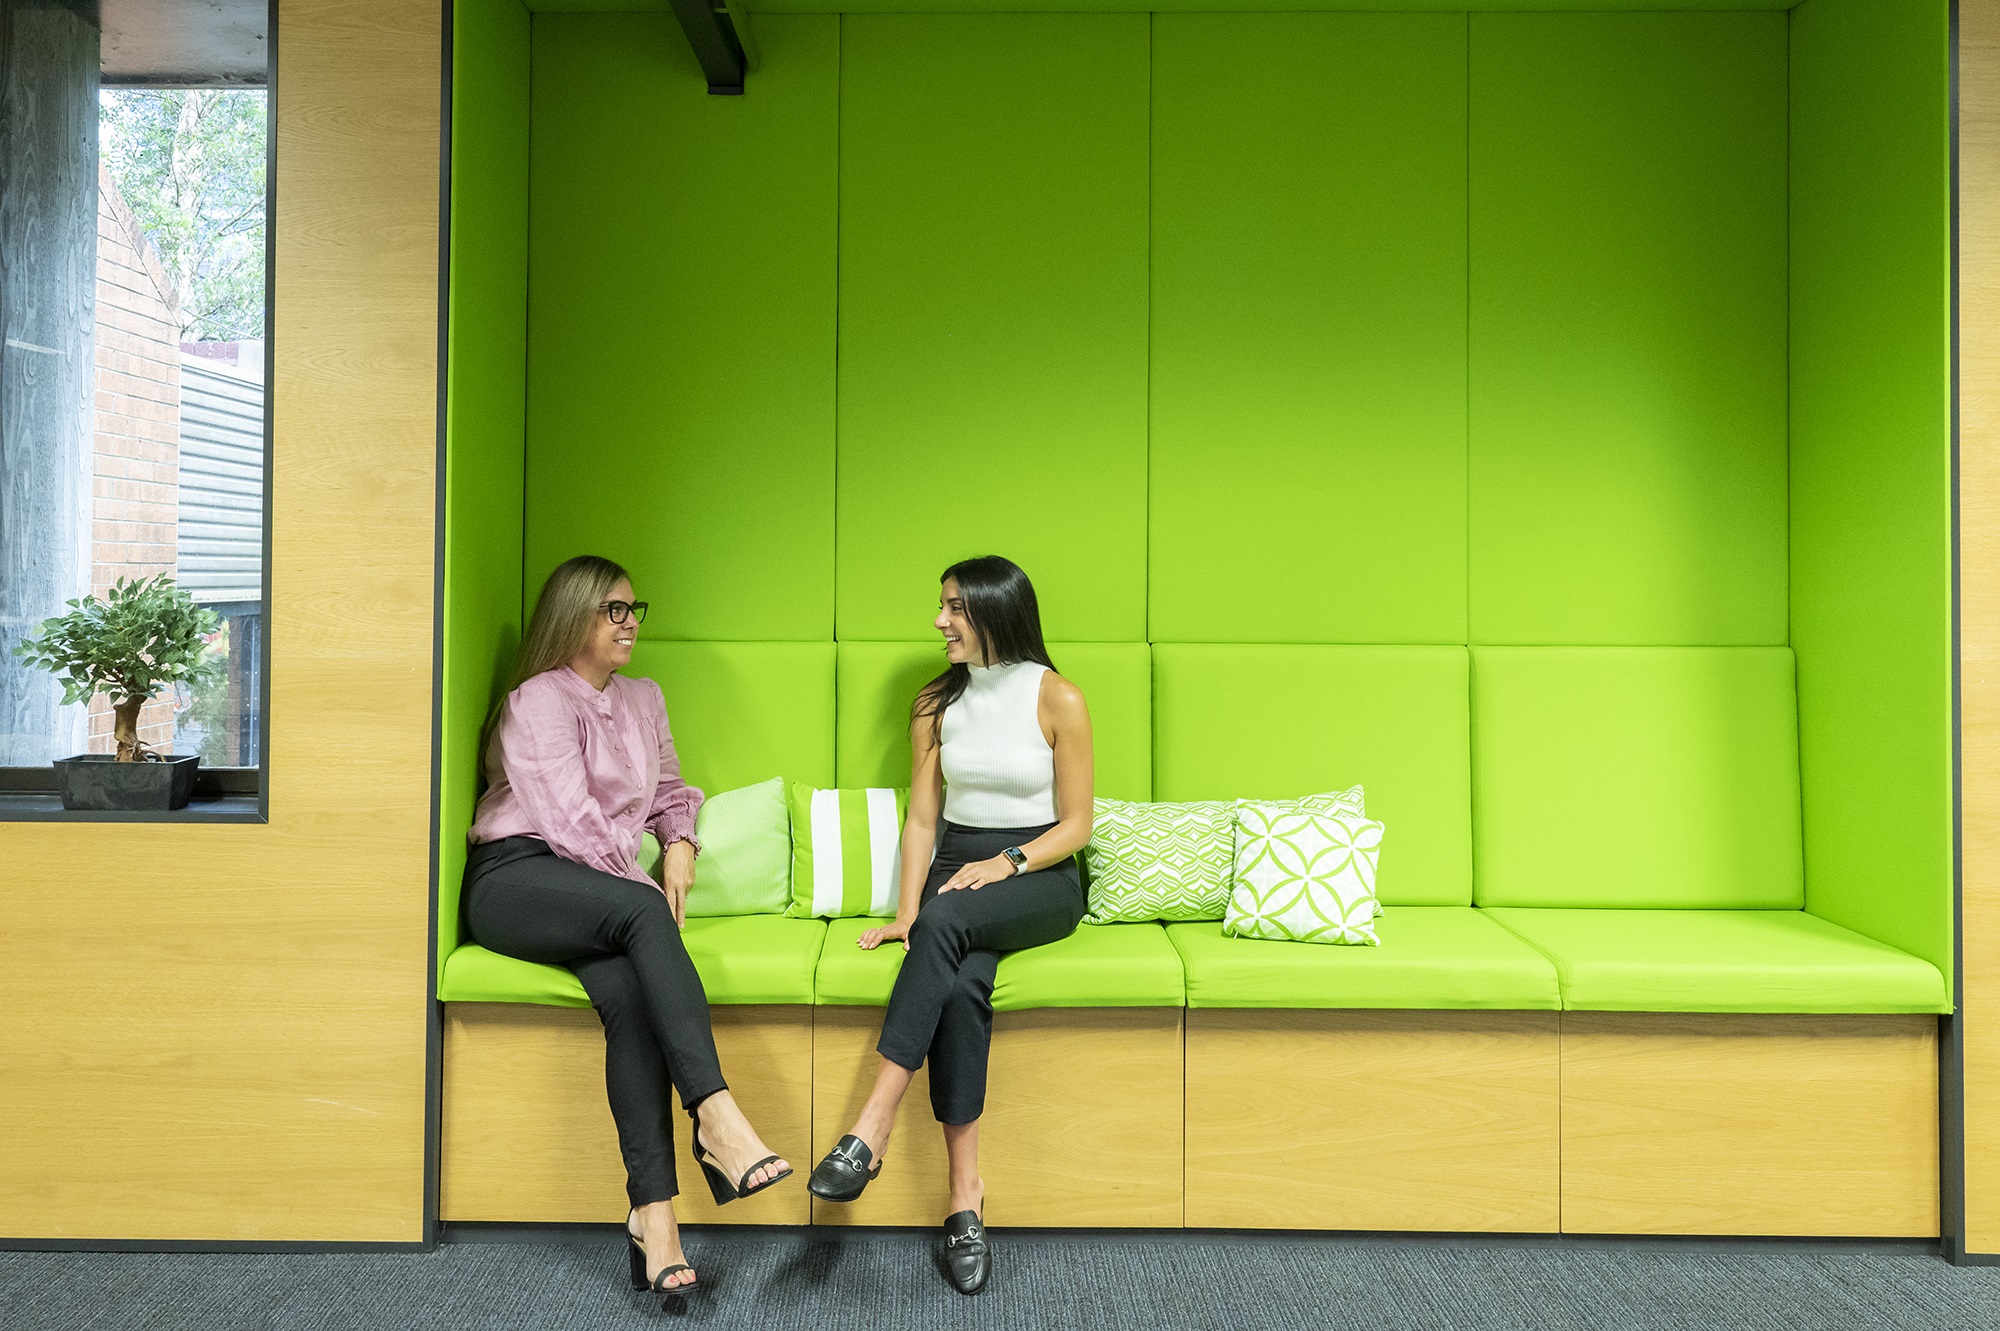 Two colleagues sitting on green chair chatting